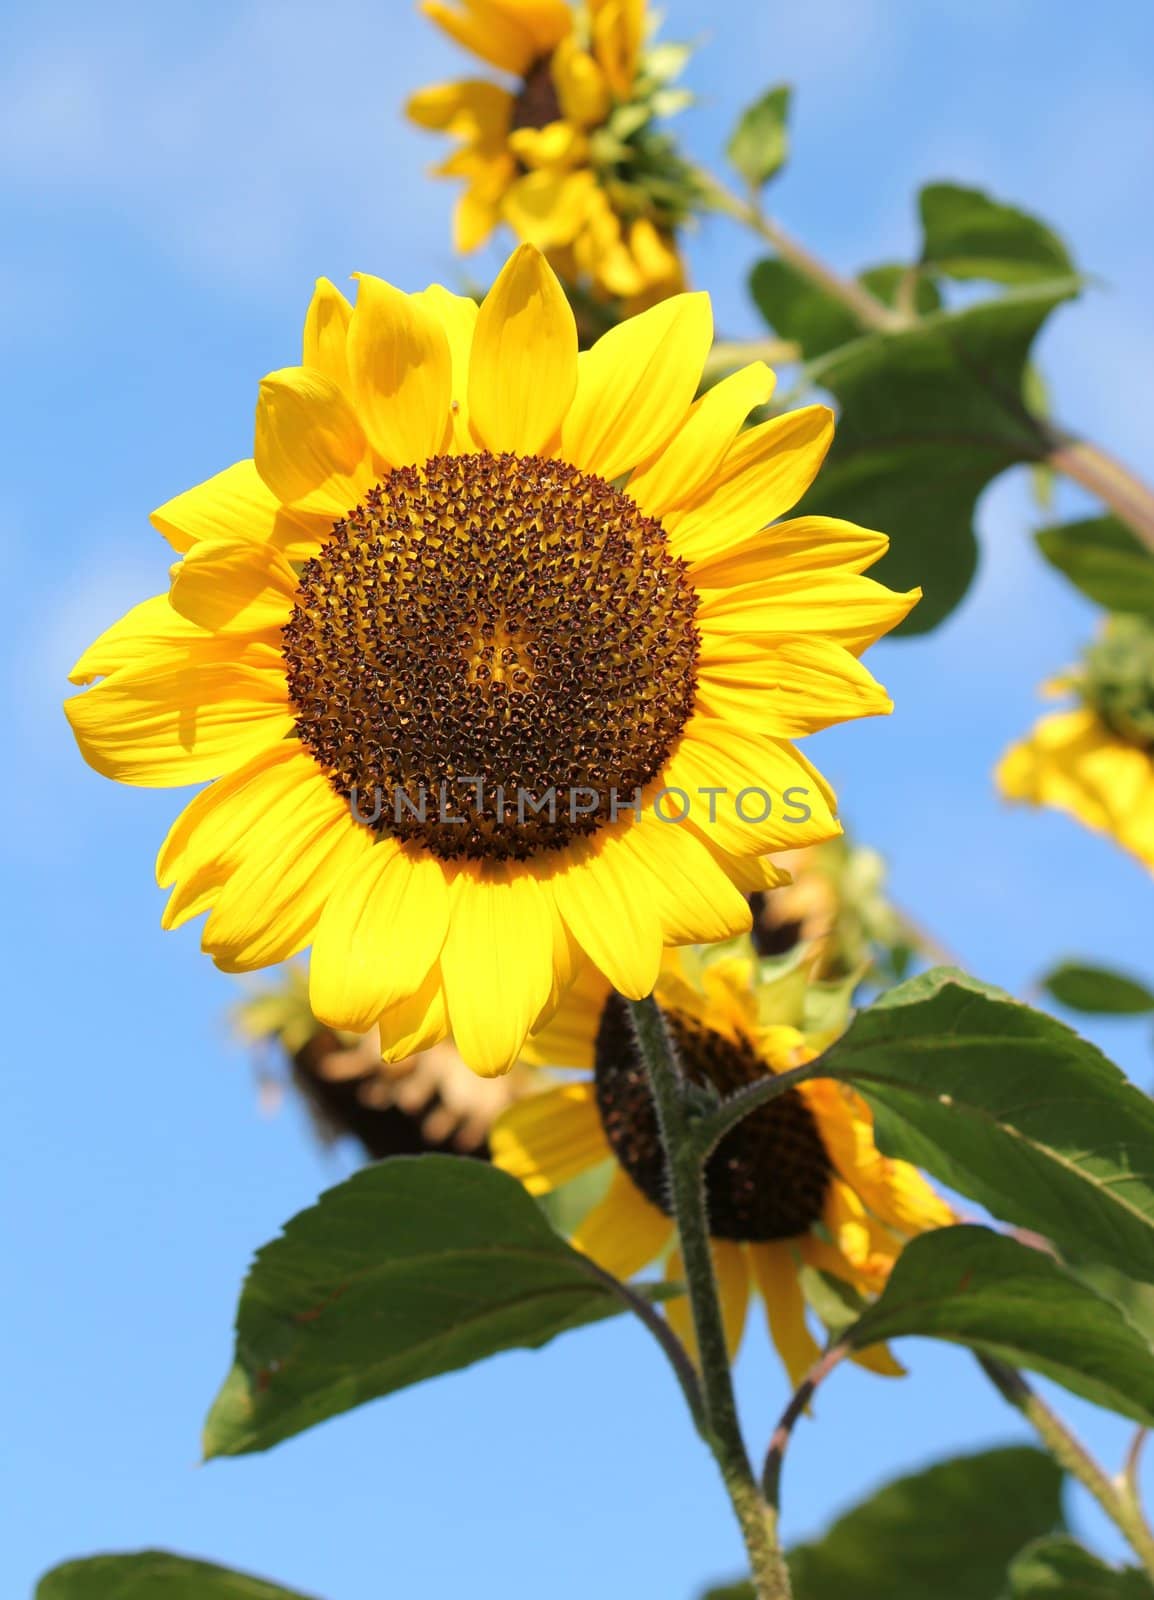 Big sunflowers by beautiful weather with blue sky